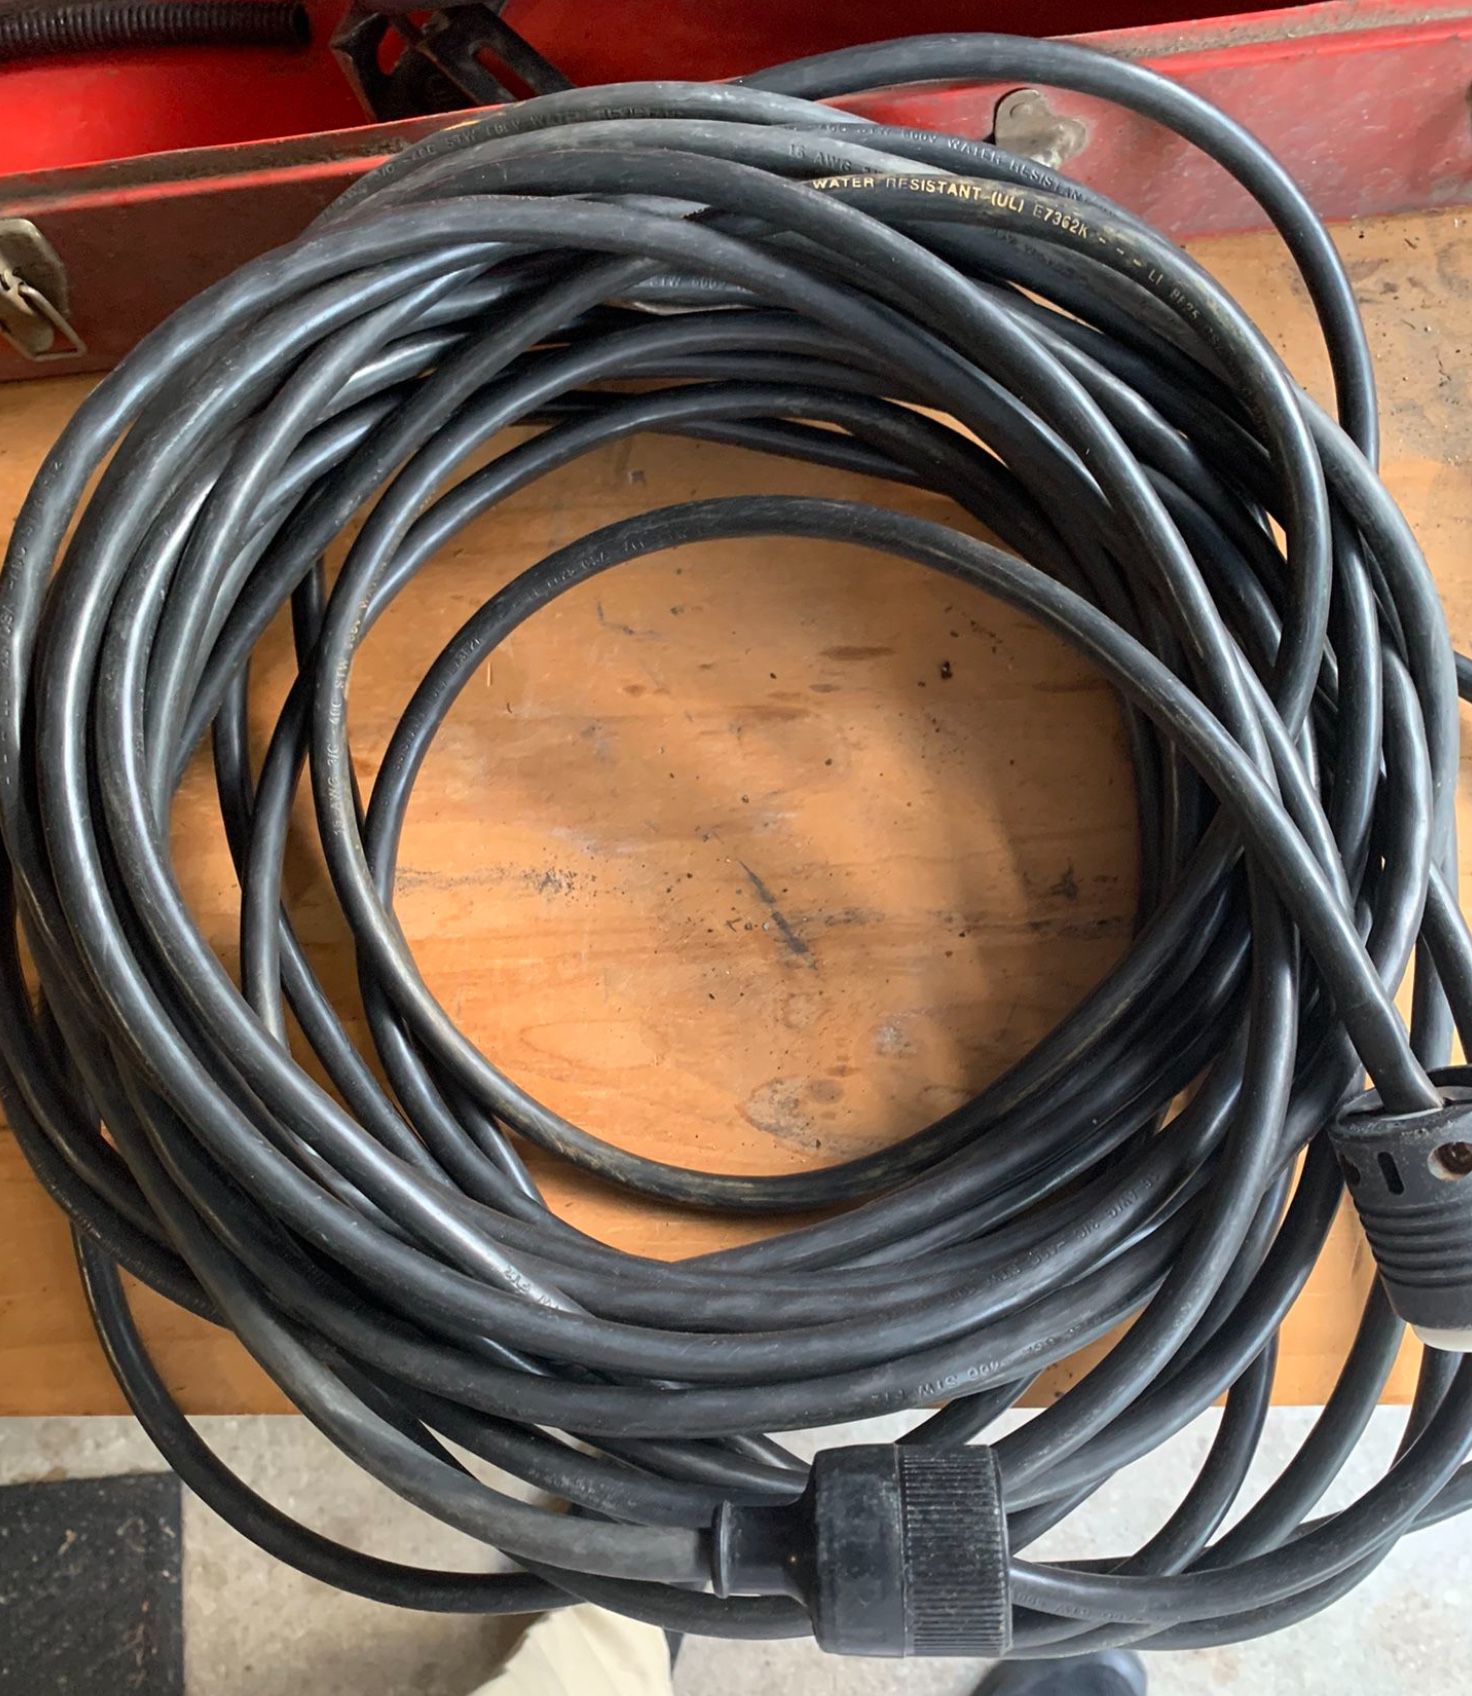 70ft Oil And Water Resistant Cable